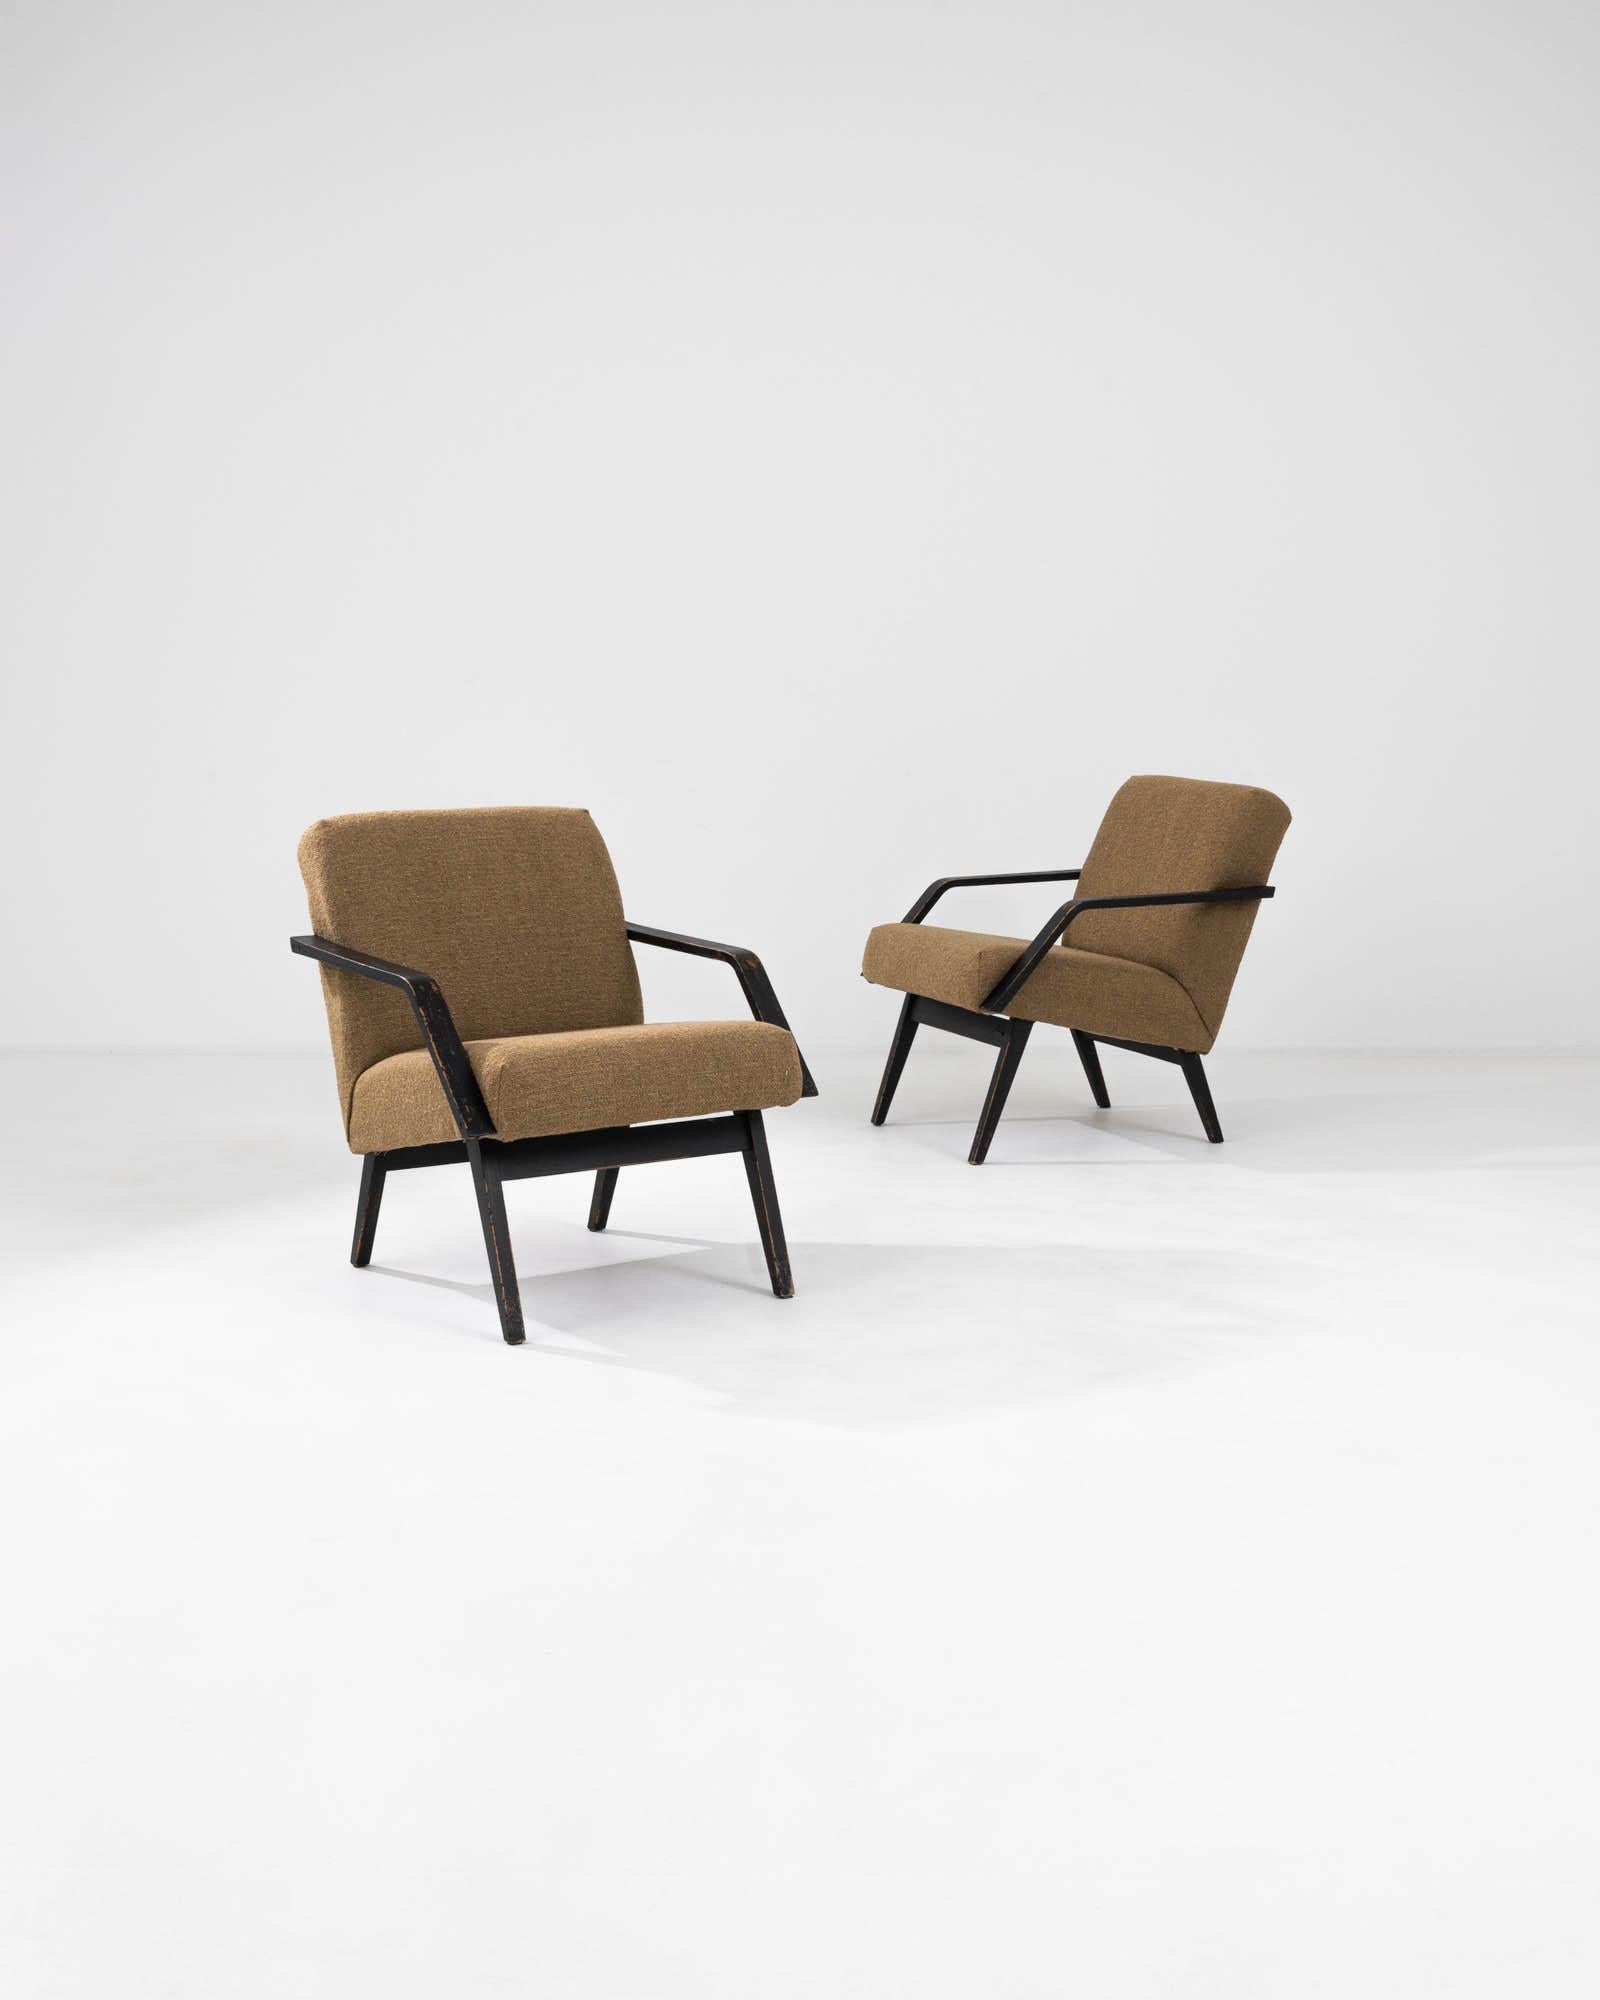 Introducing a pair of 1960s Czech Upholstered Armchairs that encapsulate the essence of mid-century modern design with a dash of European flair. Clad in a textured golden-brown fabric, these chairs offer a visual warmth that invites relaxation and